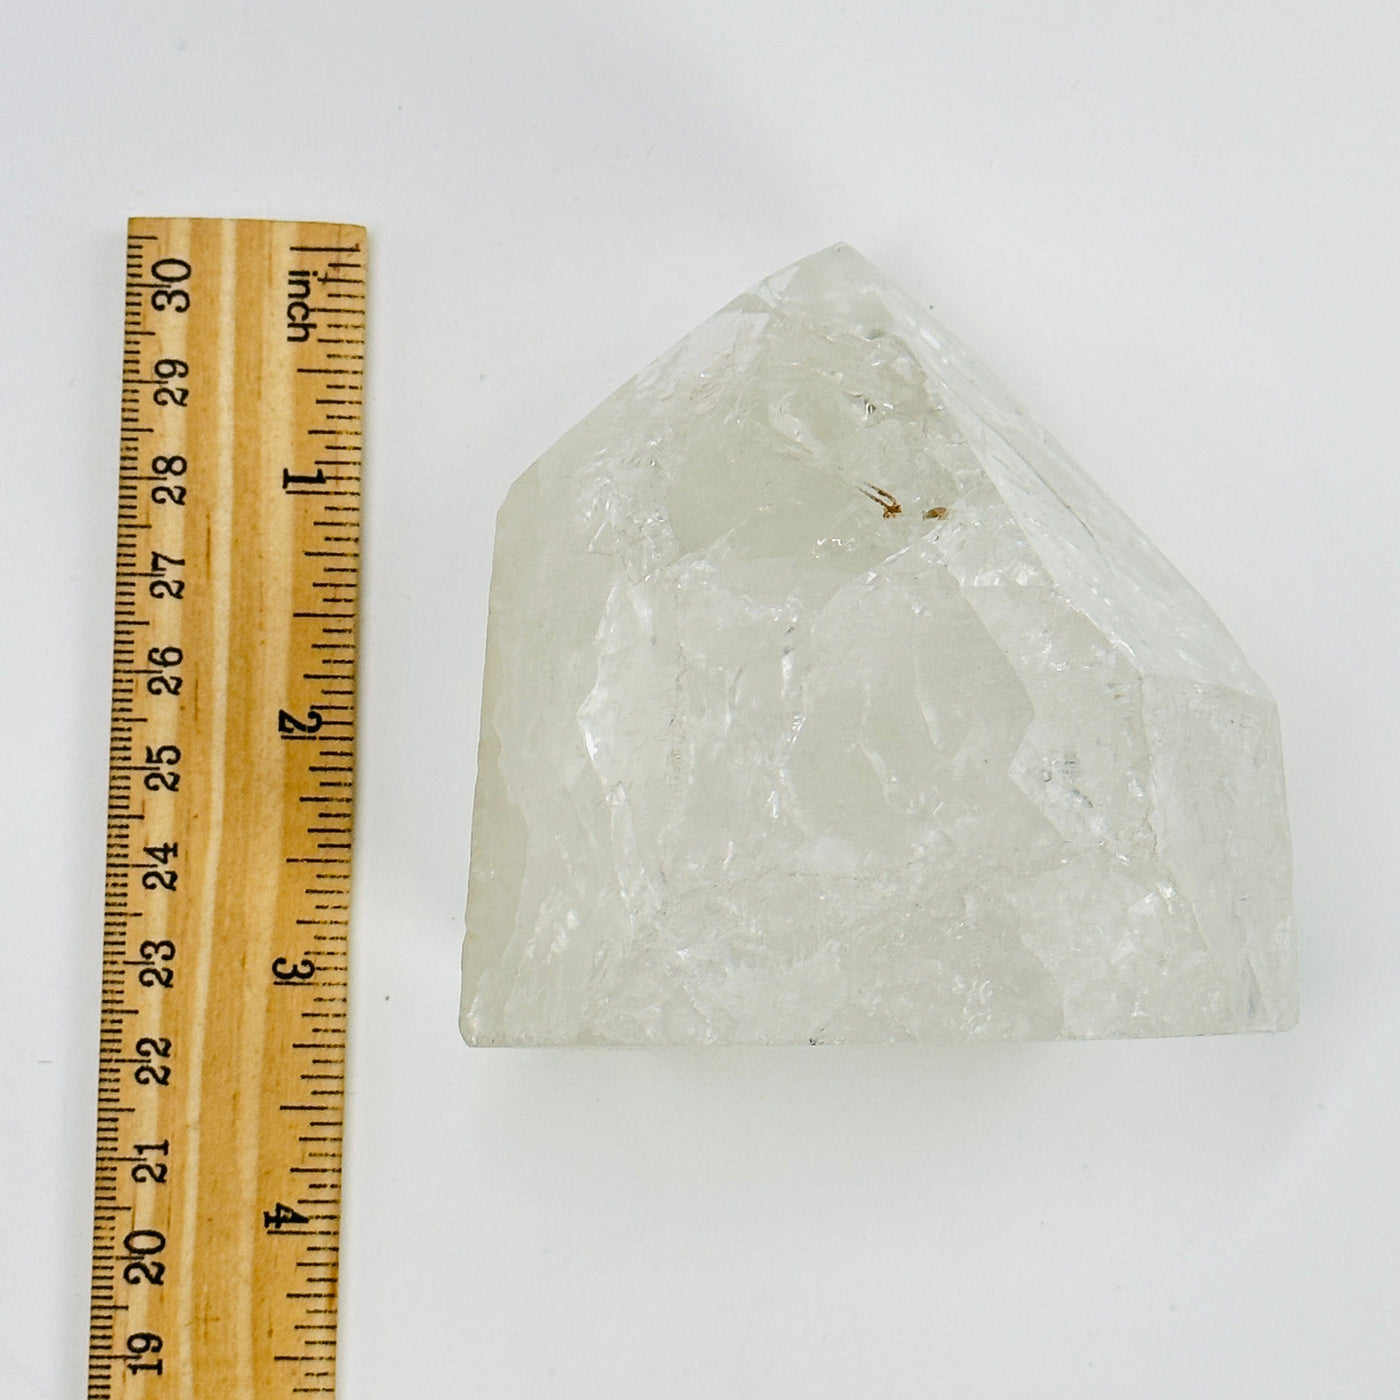 crackle quartz next to a ruler for size reference